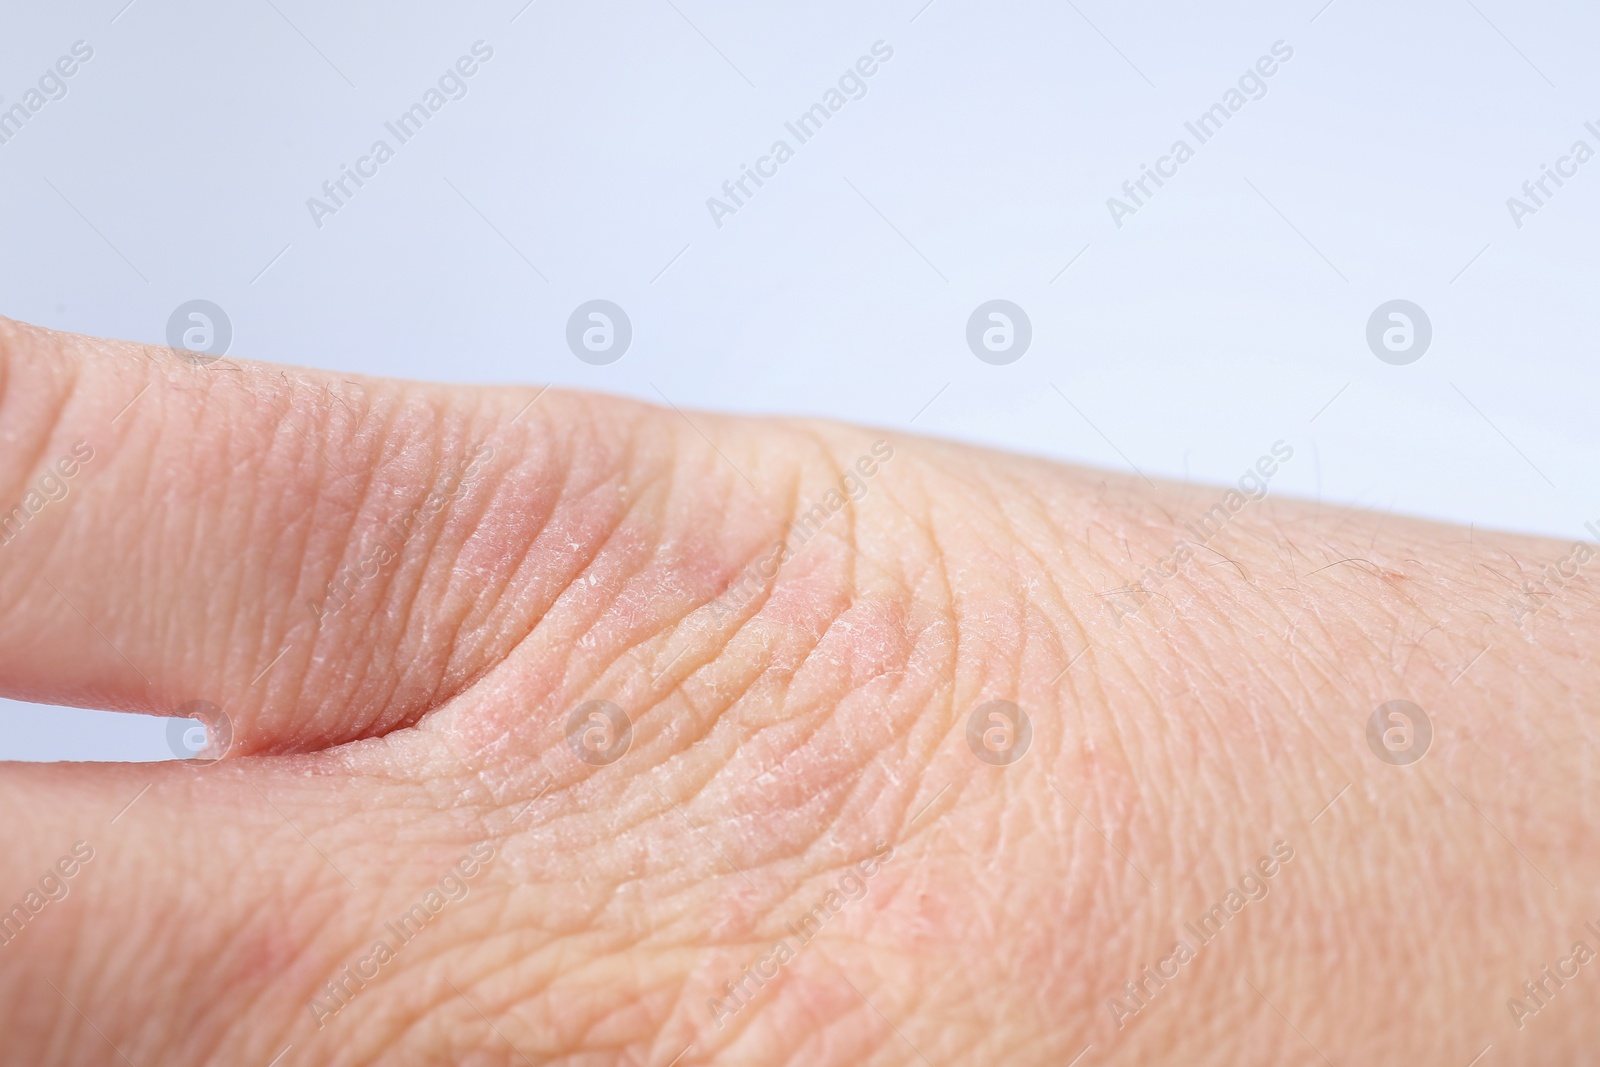 Photo of Woman with dry skin on hand against light background, closeup